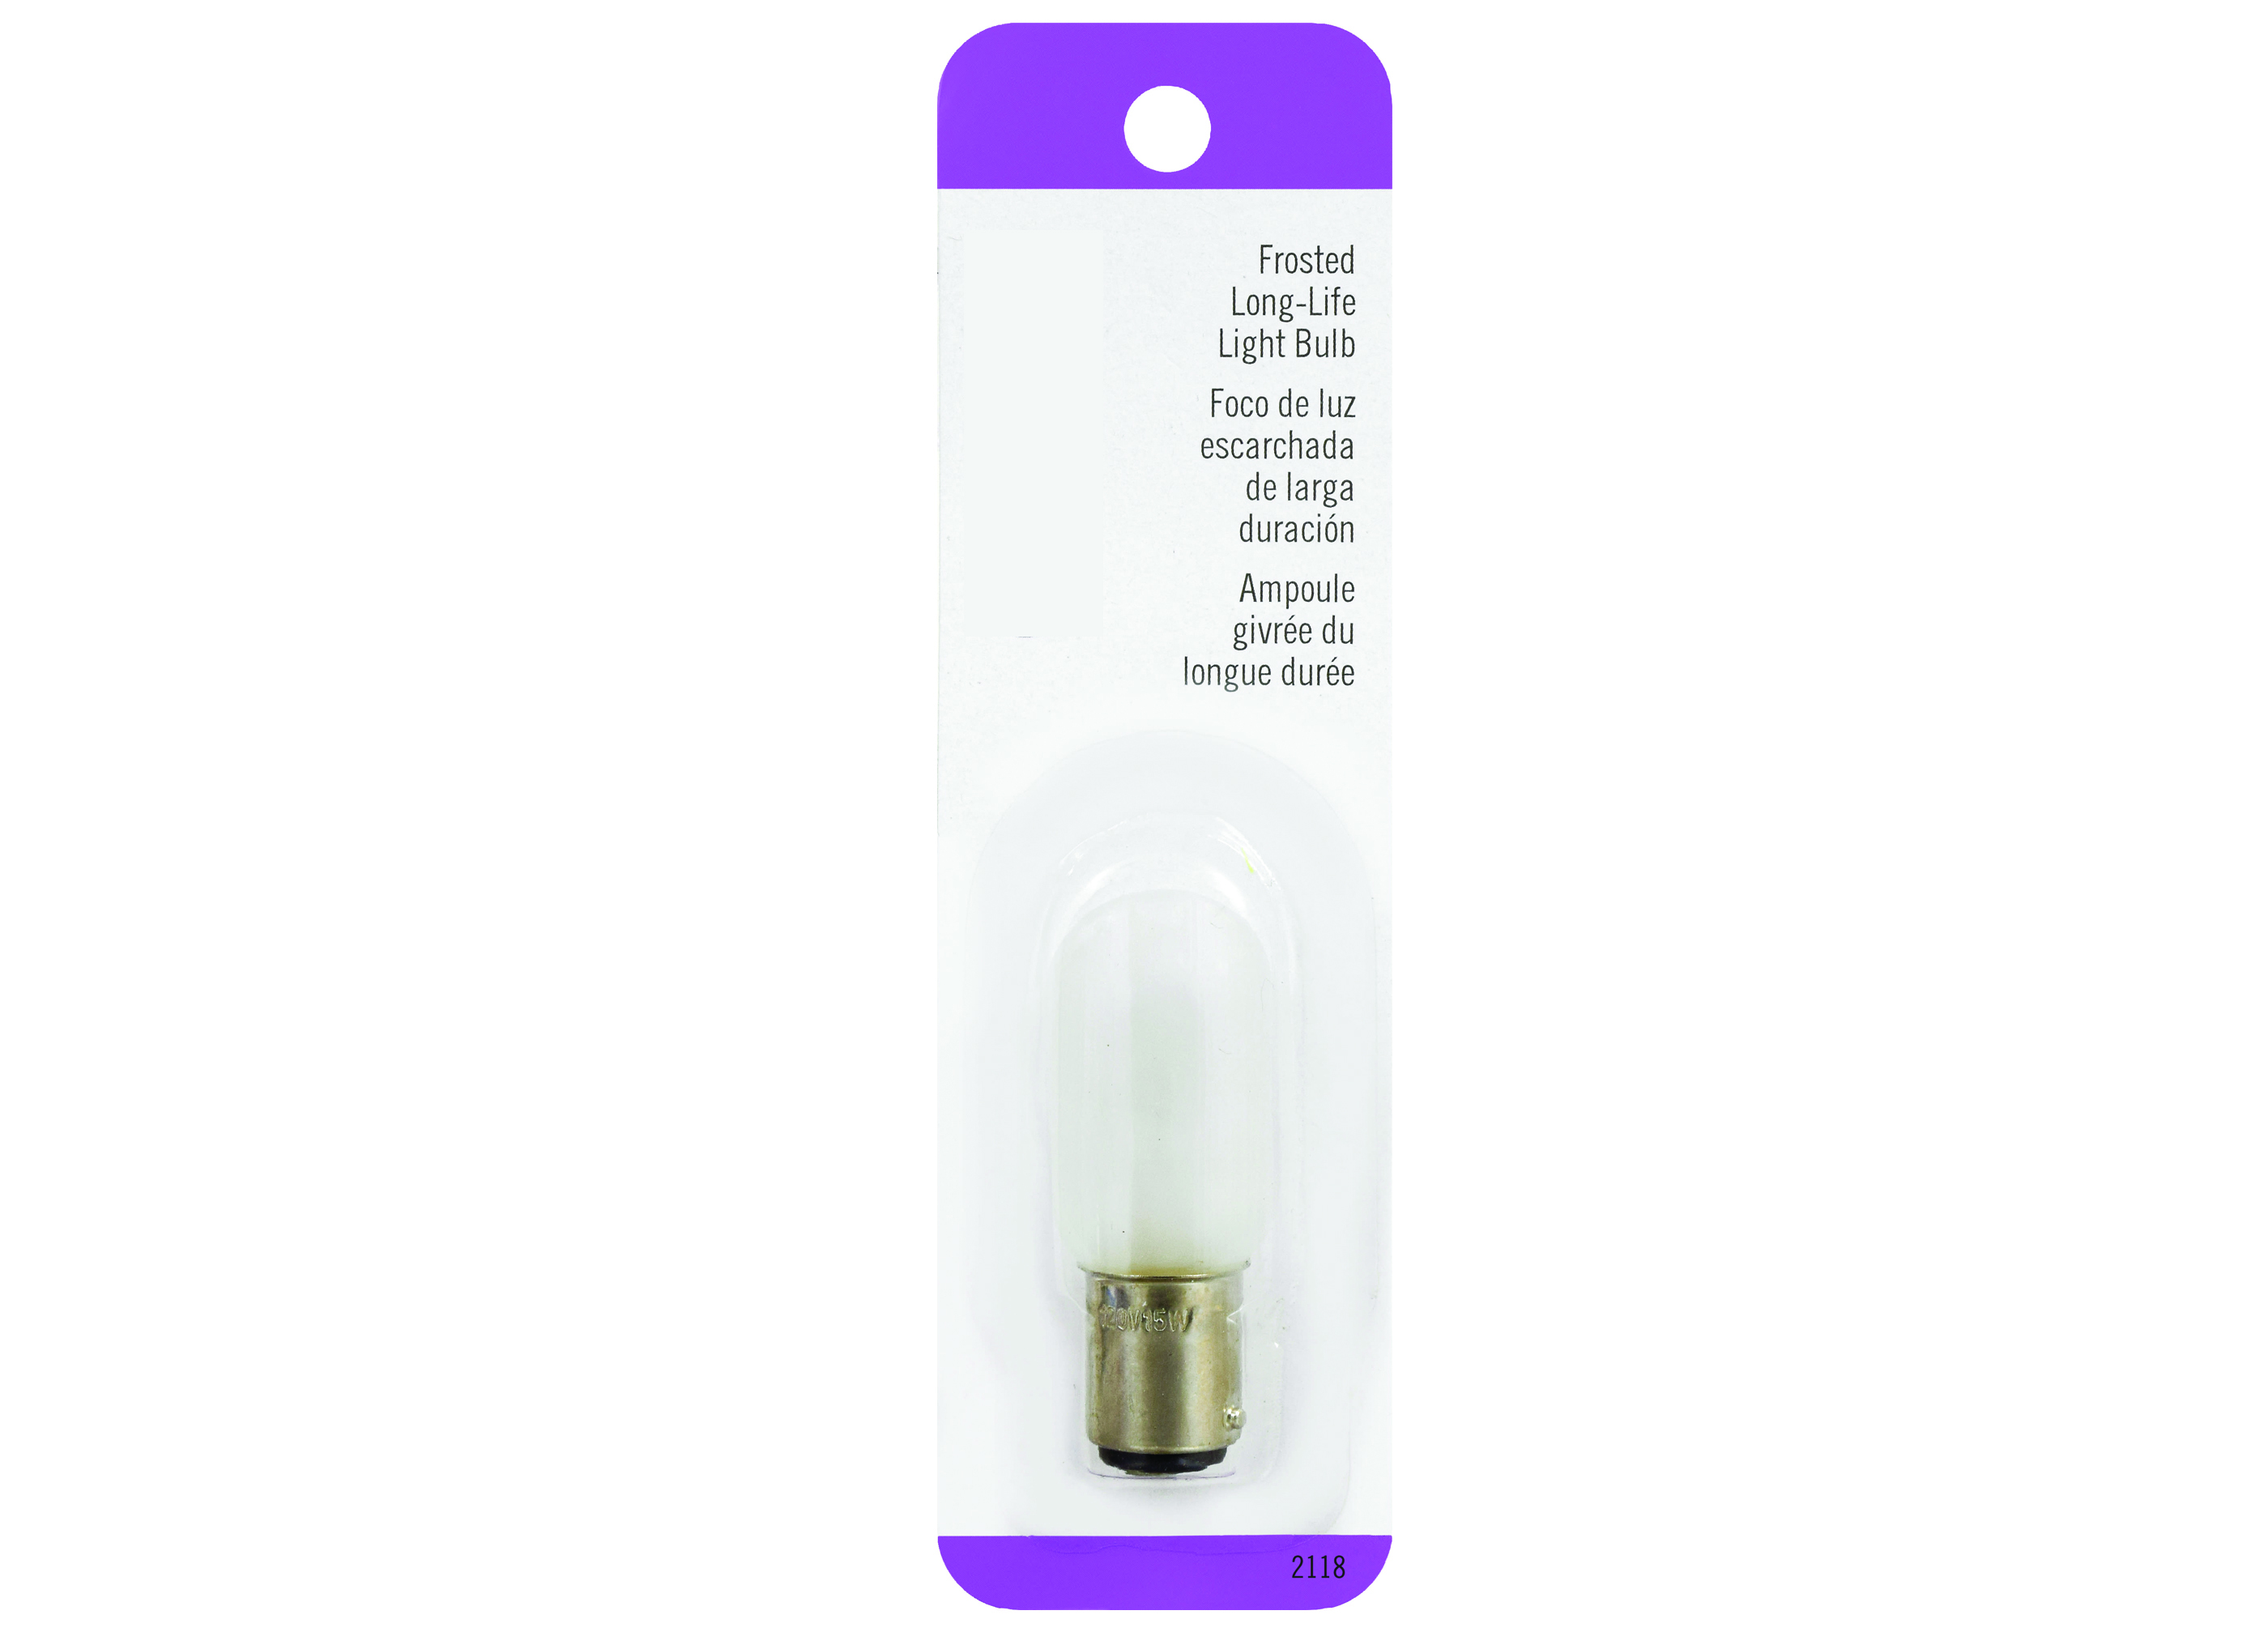 Frosted Long-Life Sewing Machine Light Bulb